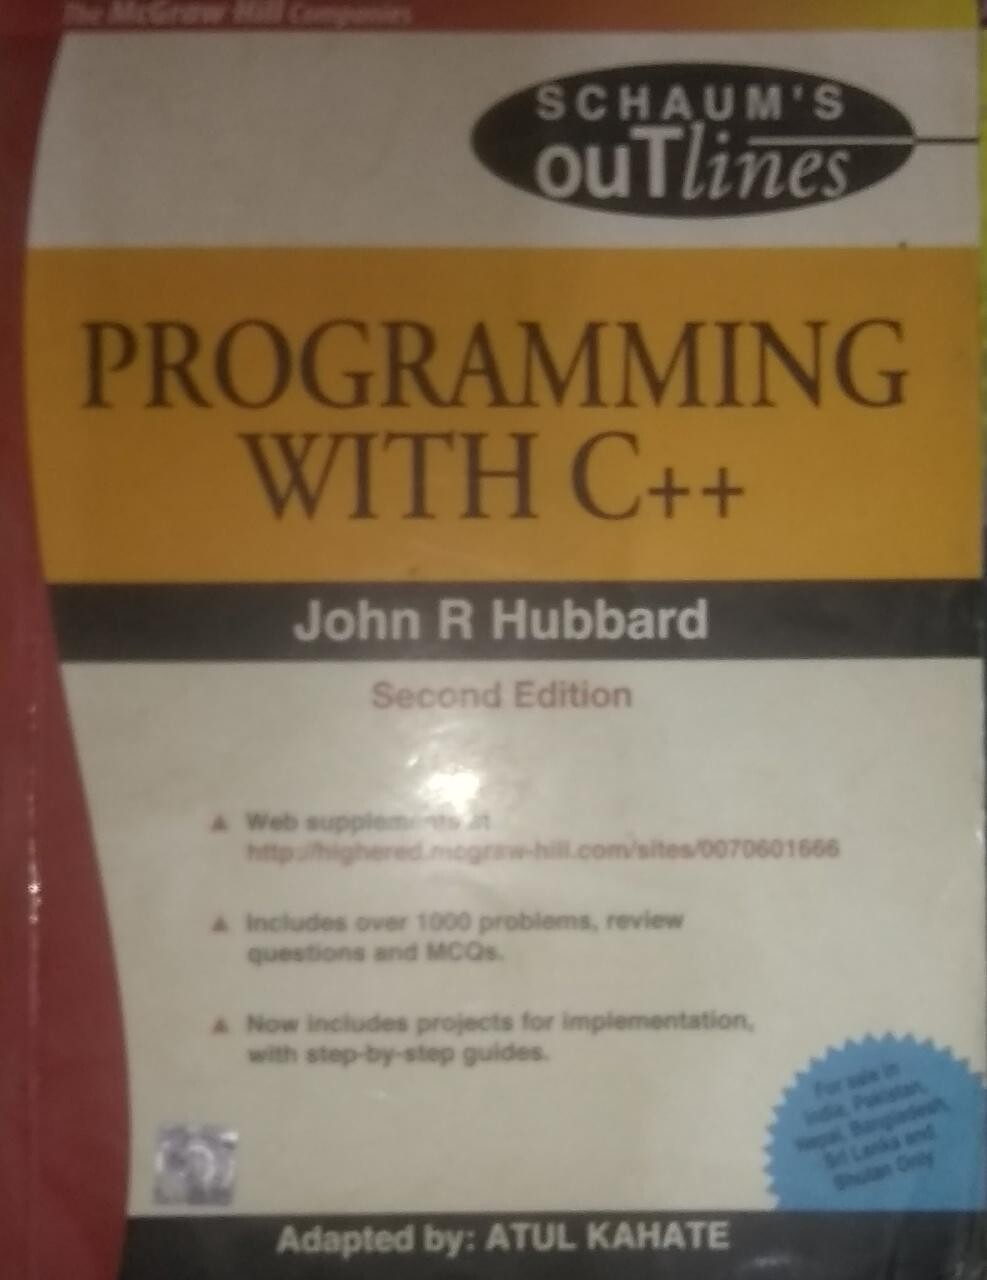 Programming With C++ (Special Indian Edition) (Schaum S Outline Series ) by John R. Hubbard